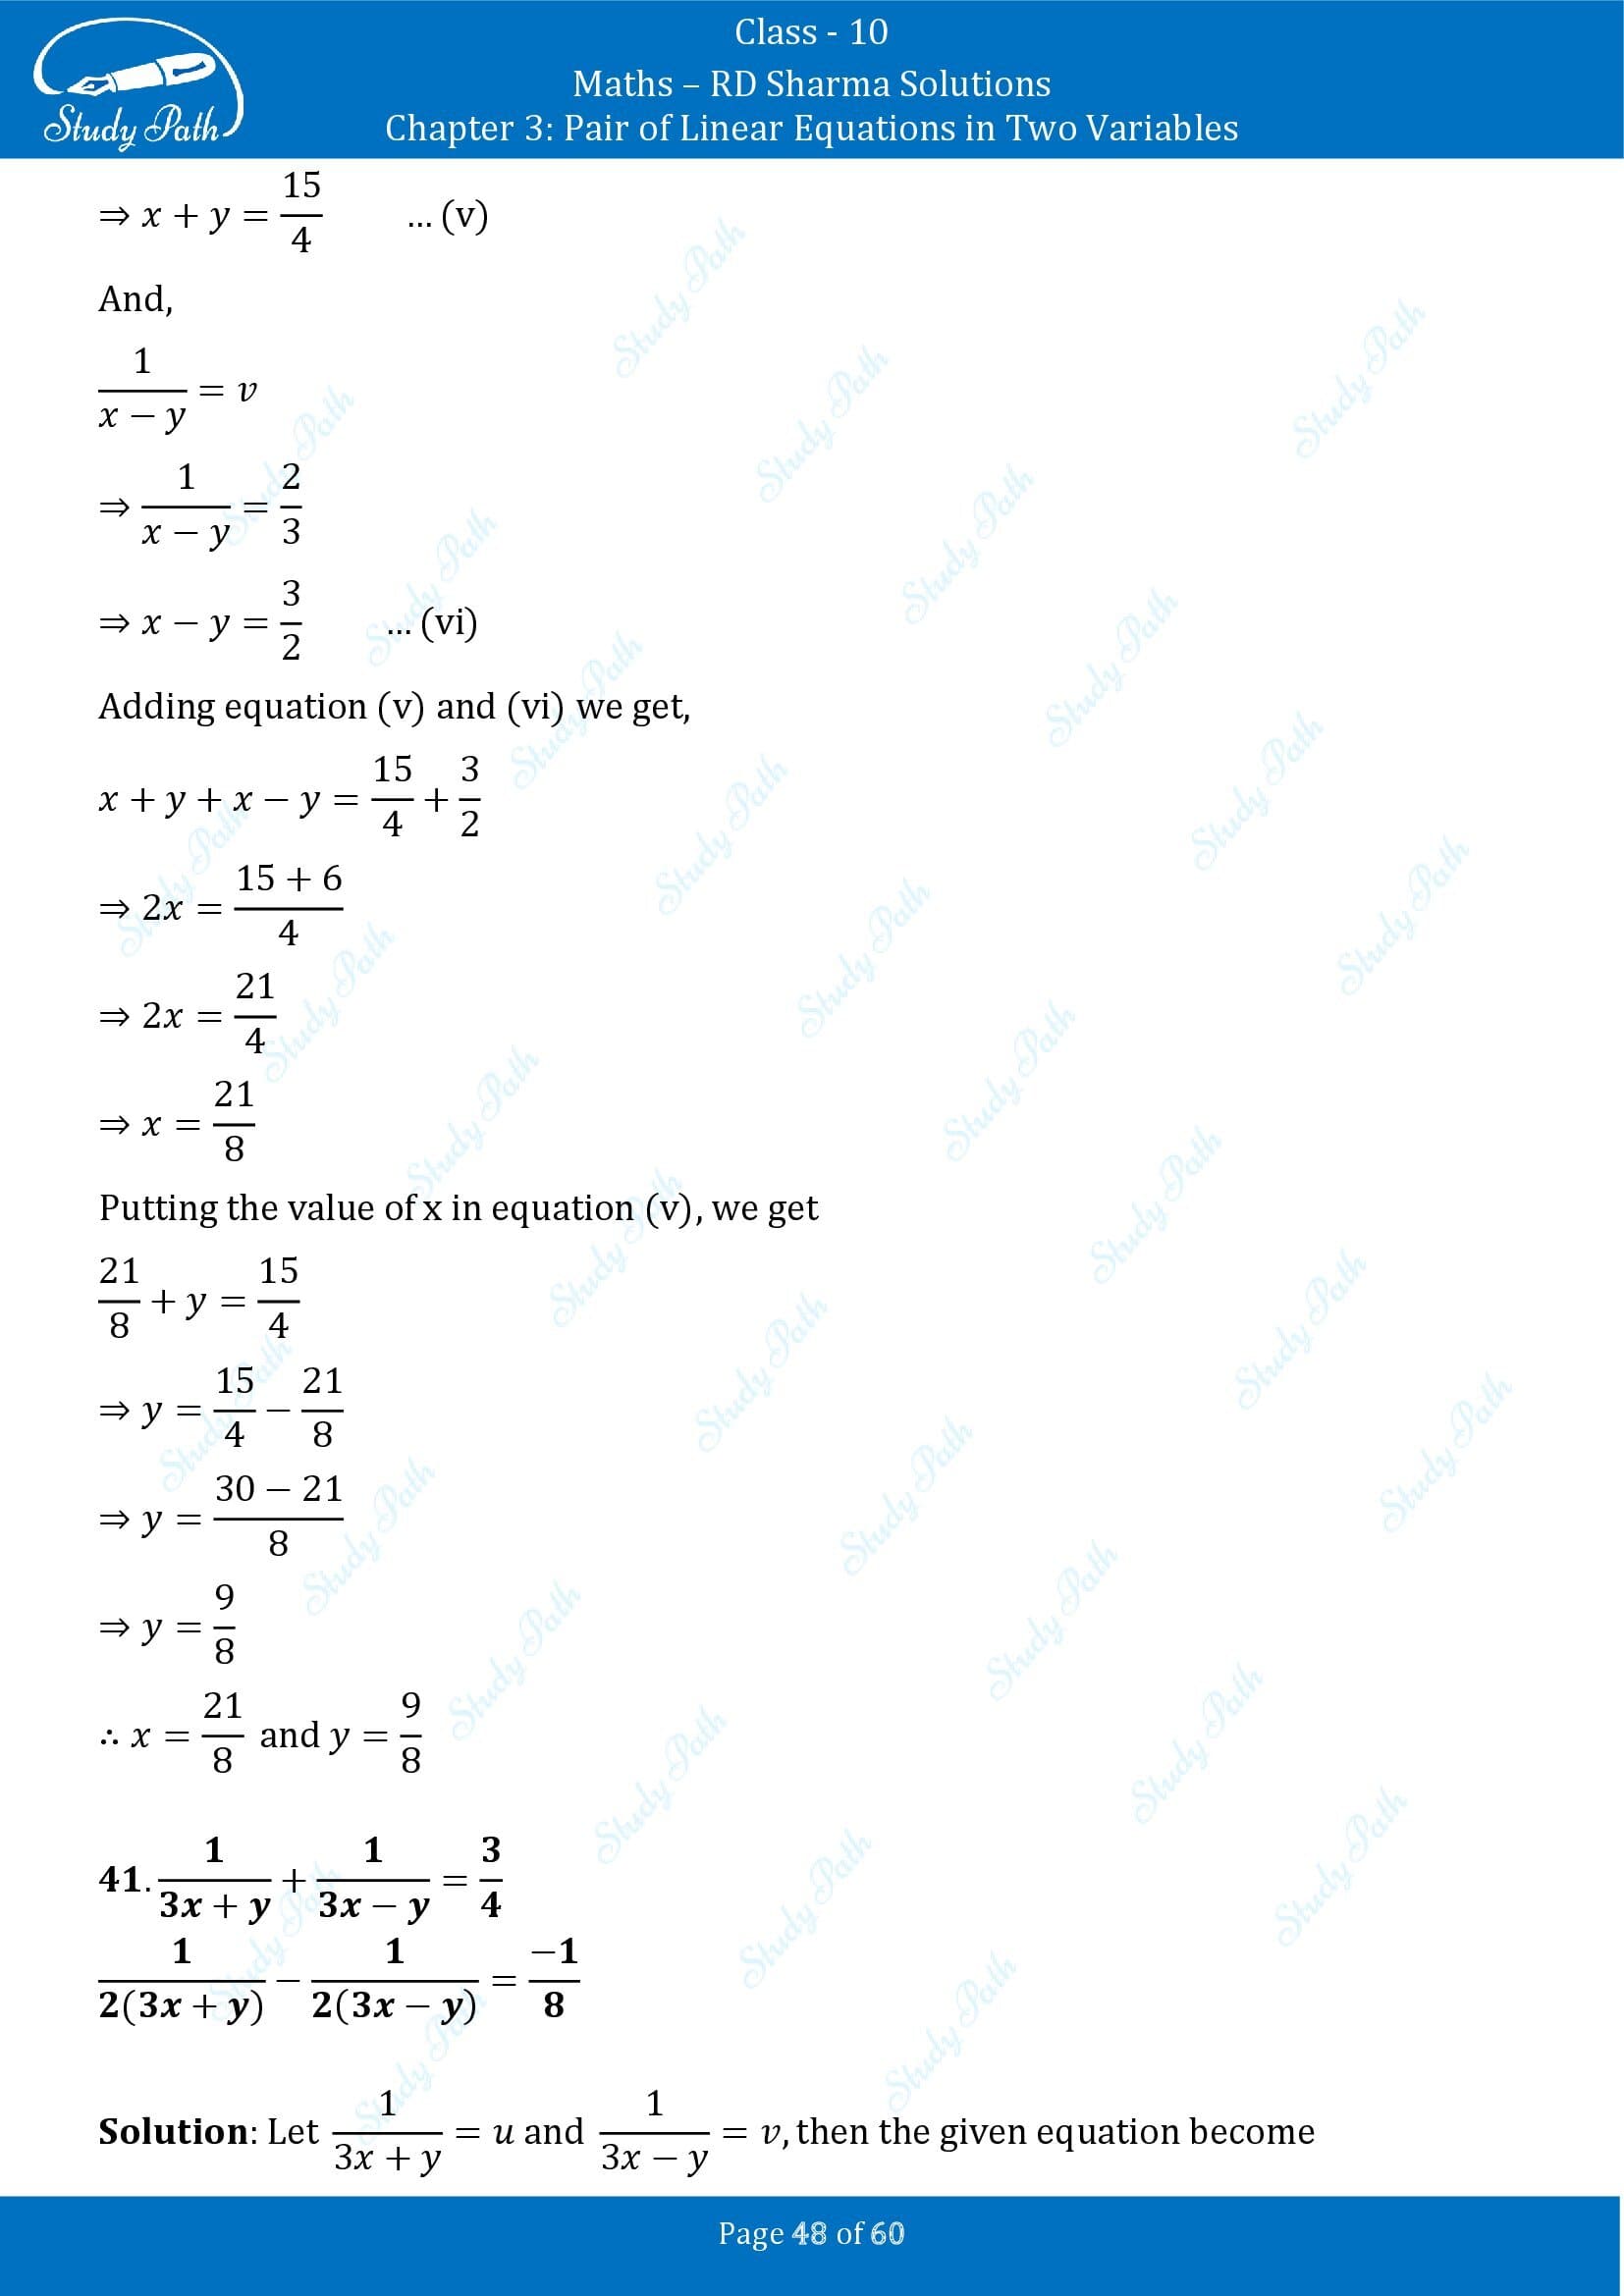 RD Sharma Solutions Class 10 Chapter 3 Pair of Linear Equations in Two Variables Exercise 3.3 00048